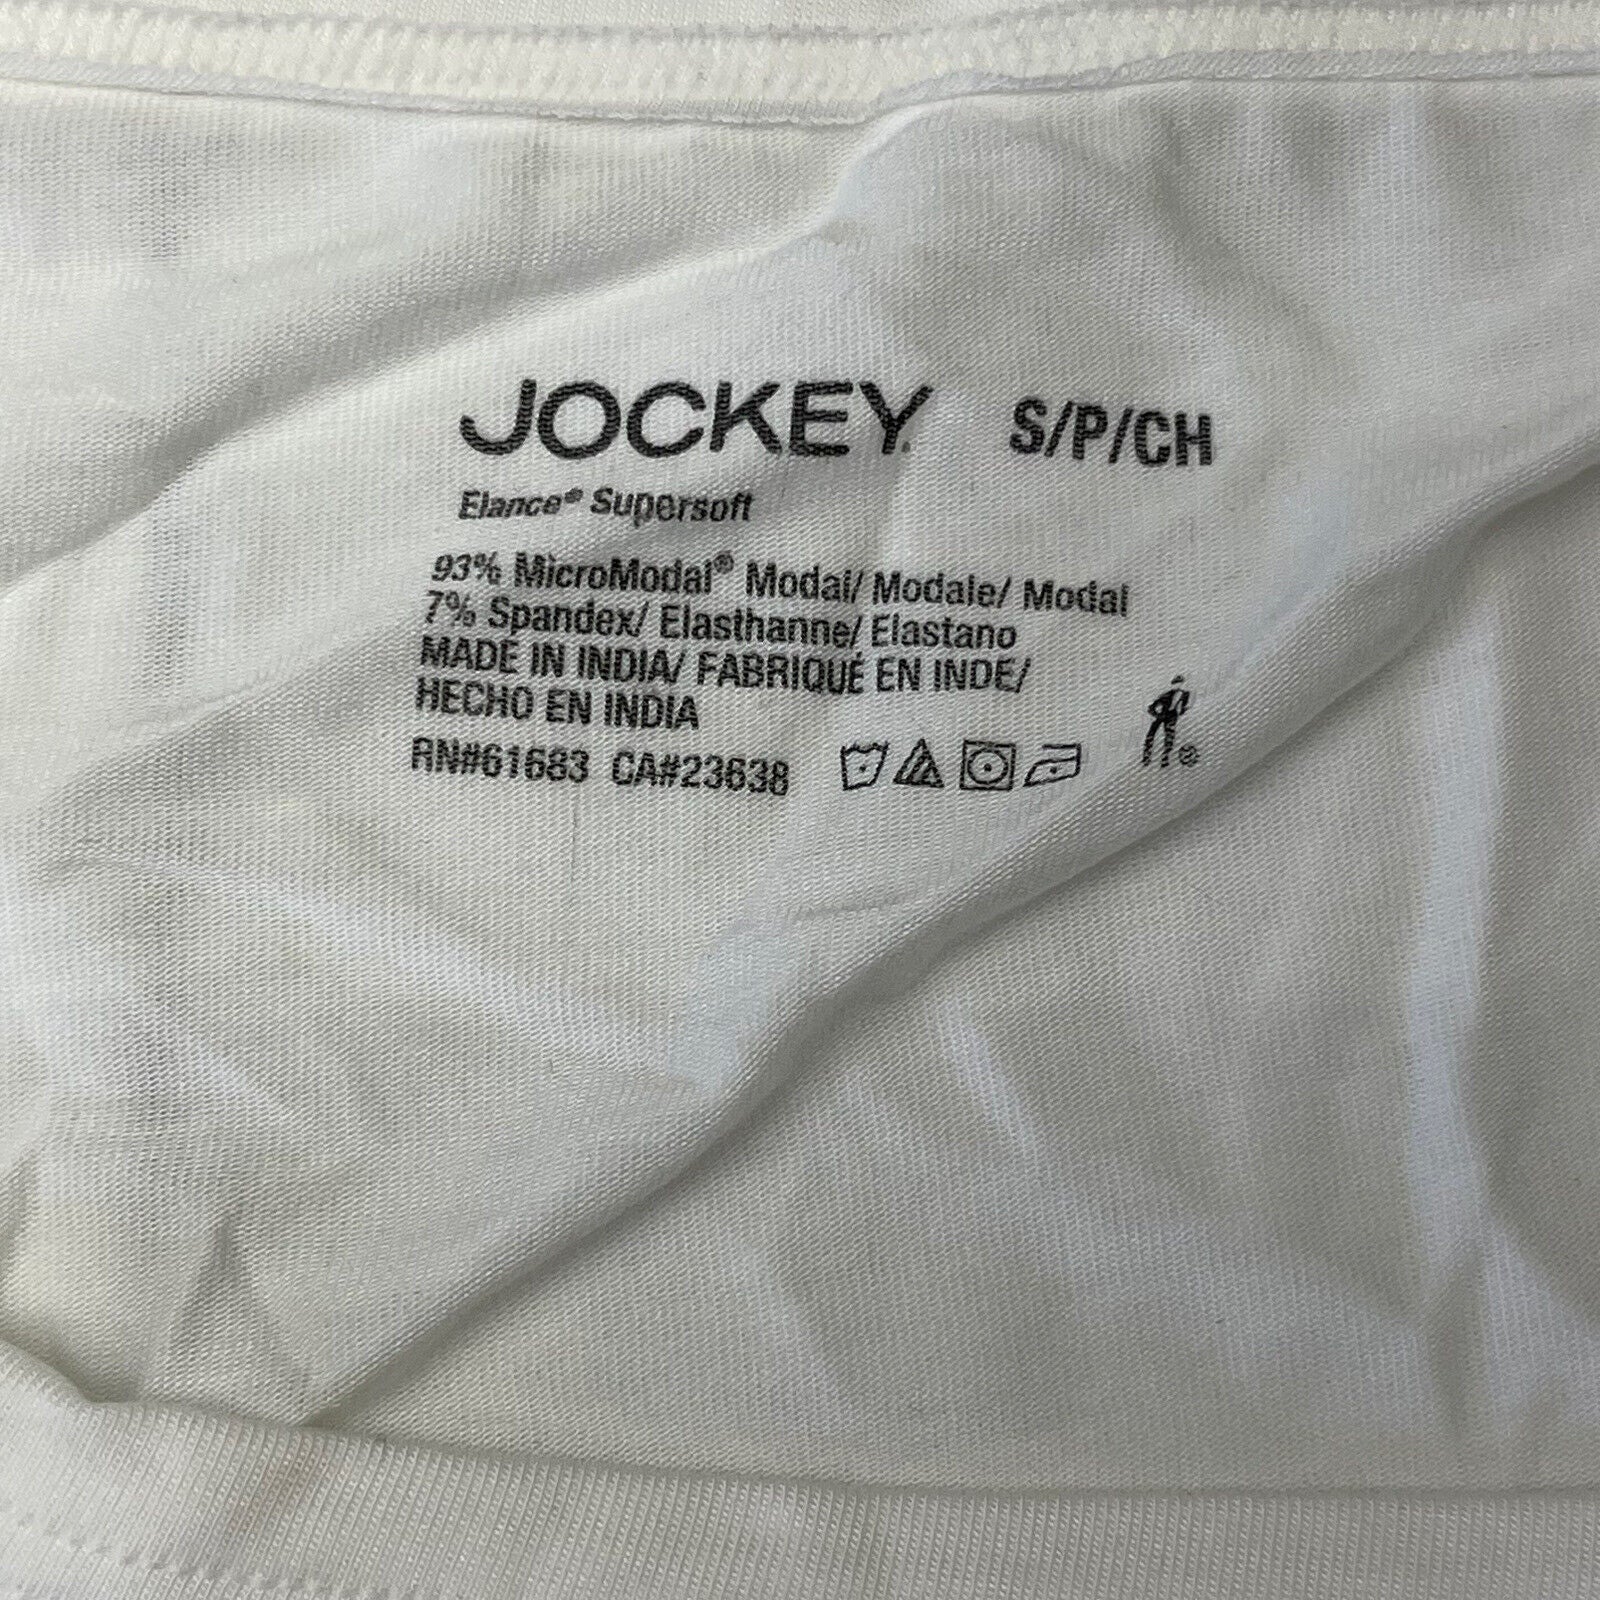 Jockey White Supersoft Cami Women's Size Small NEW - beyond exchange